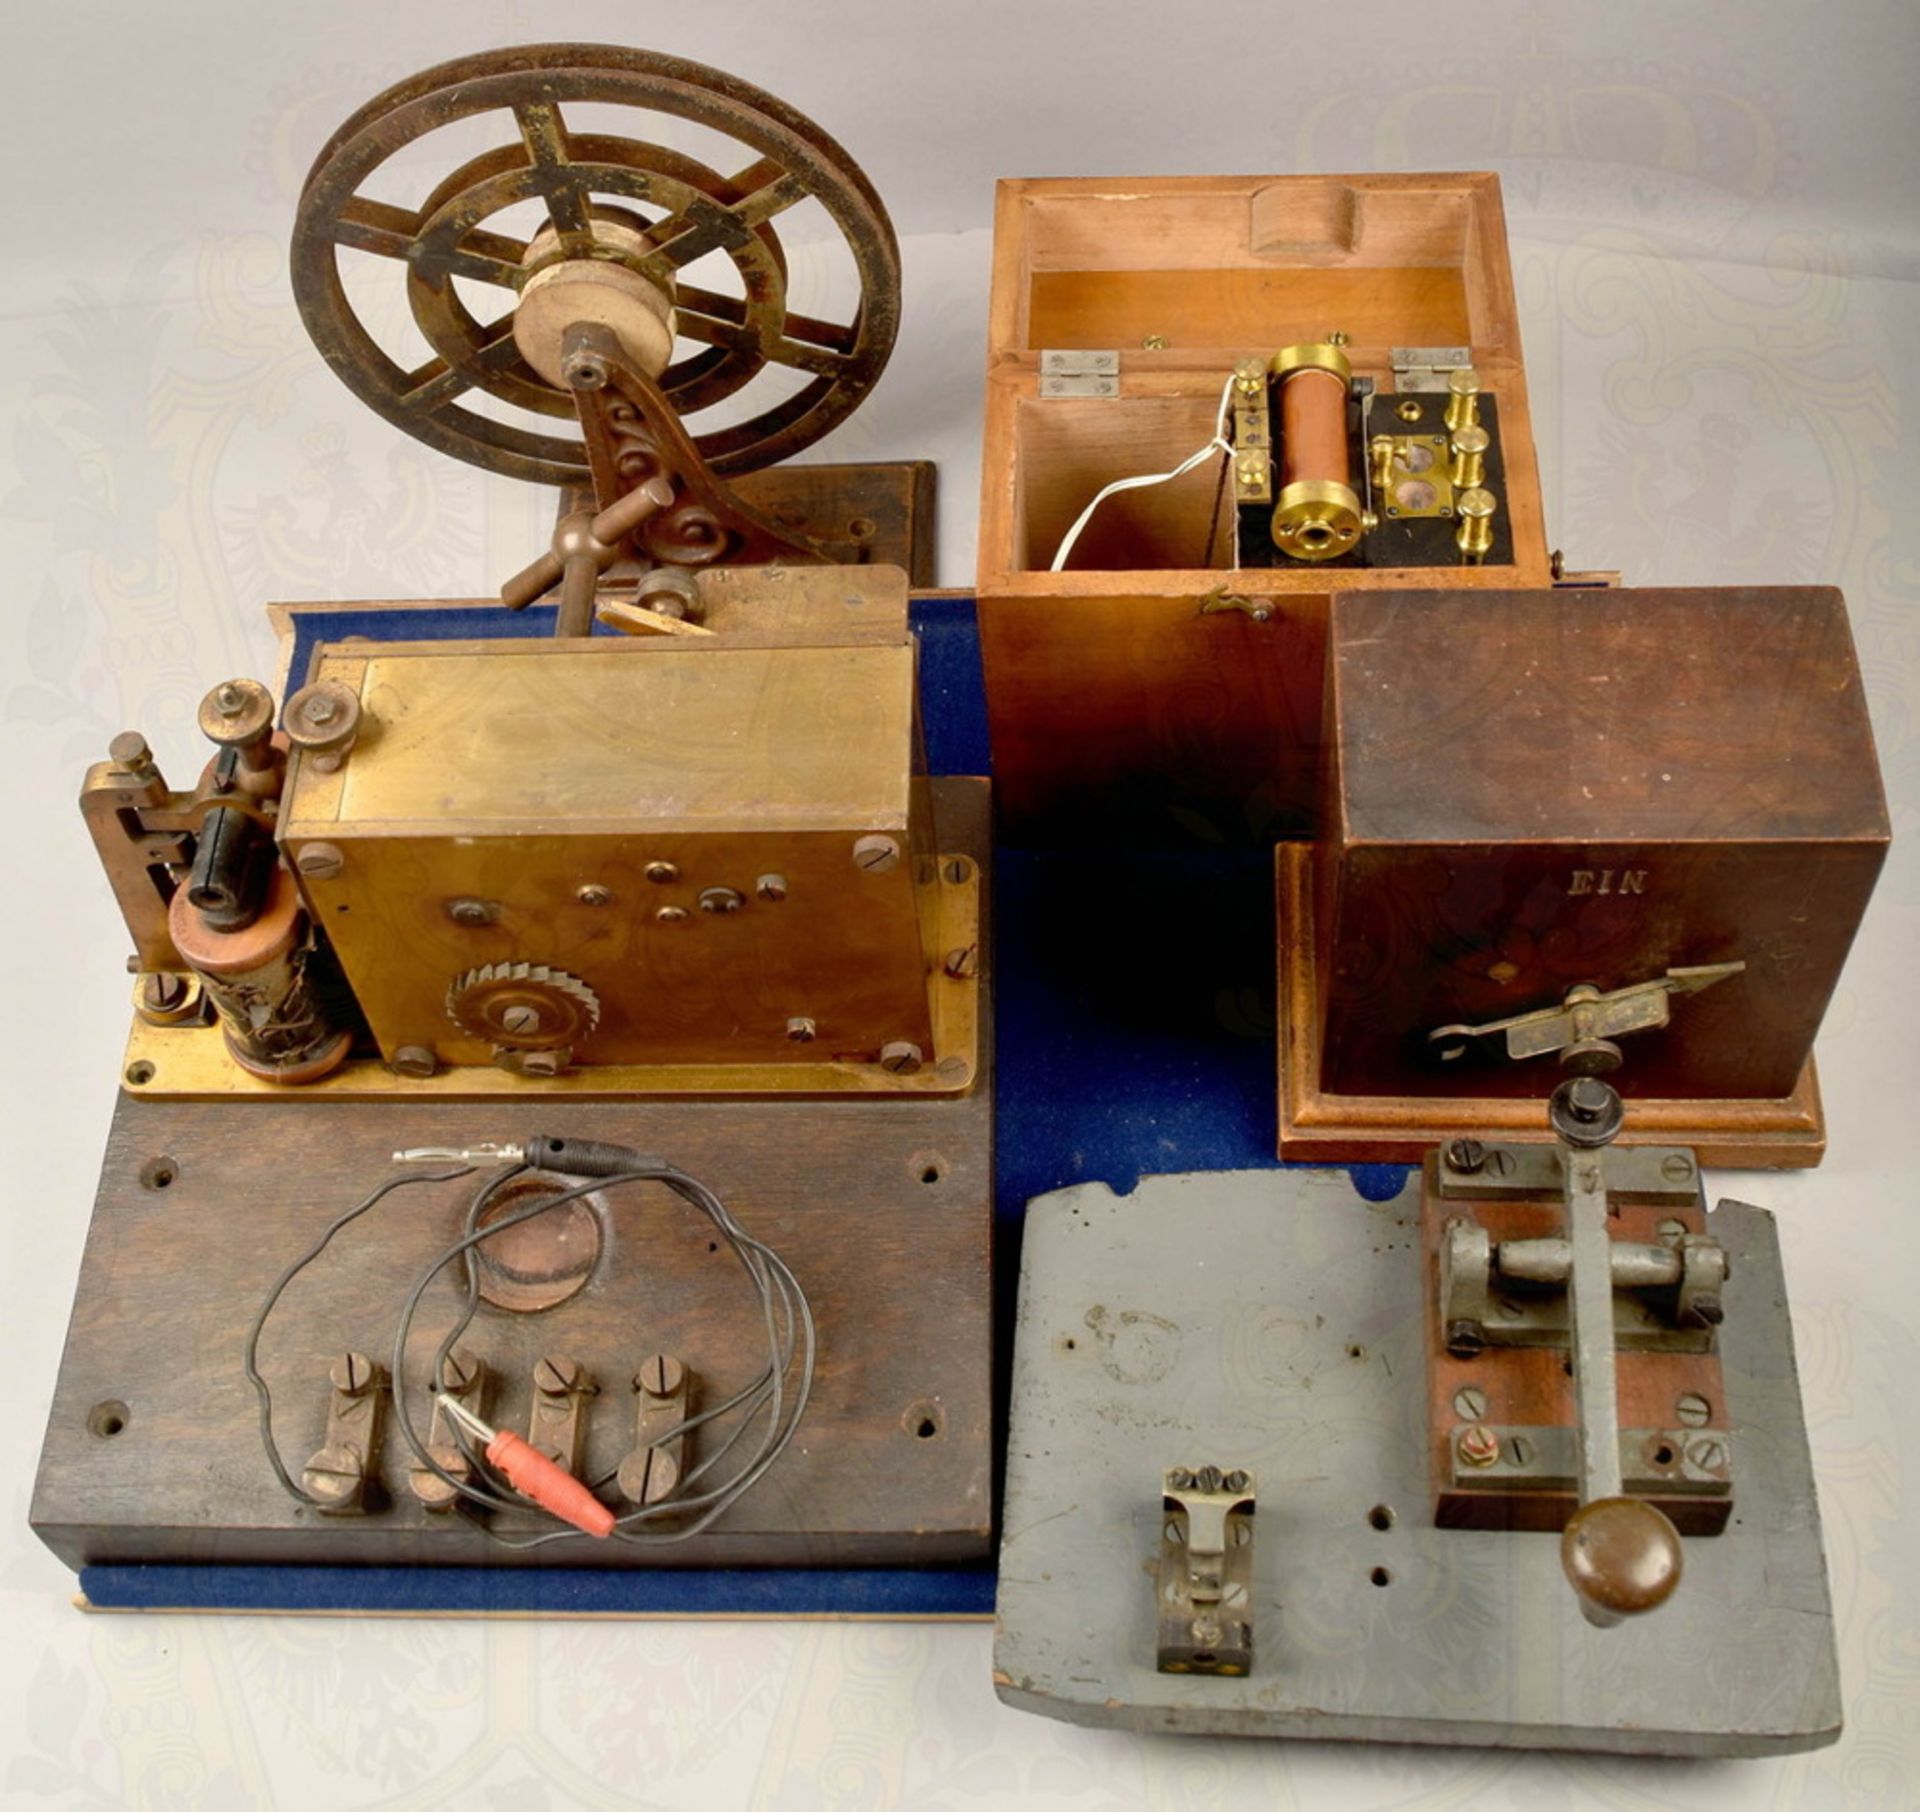 Telegraph equipment made about 1900